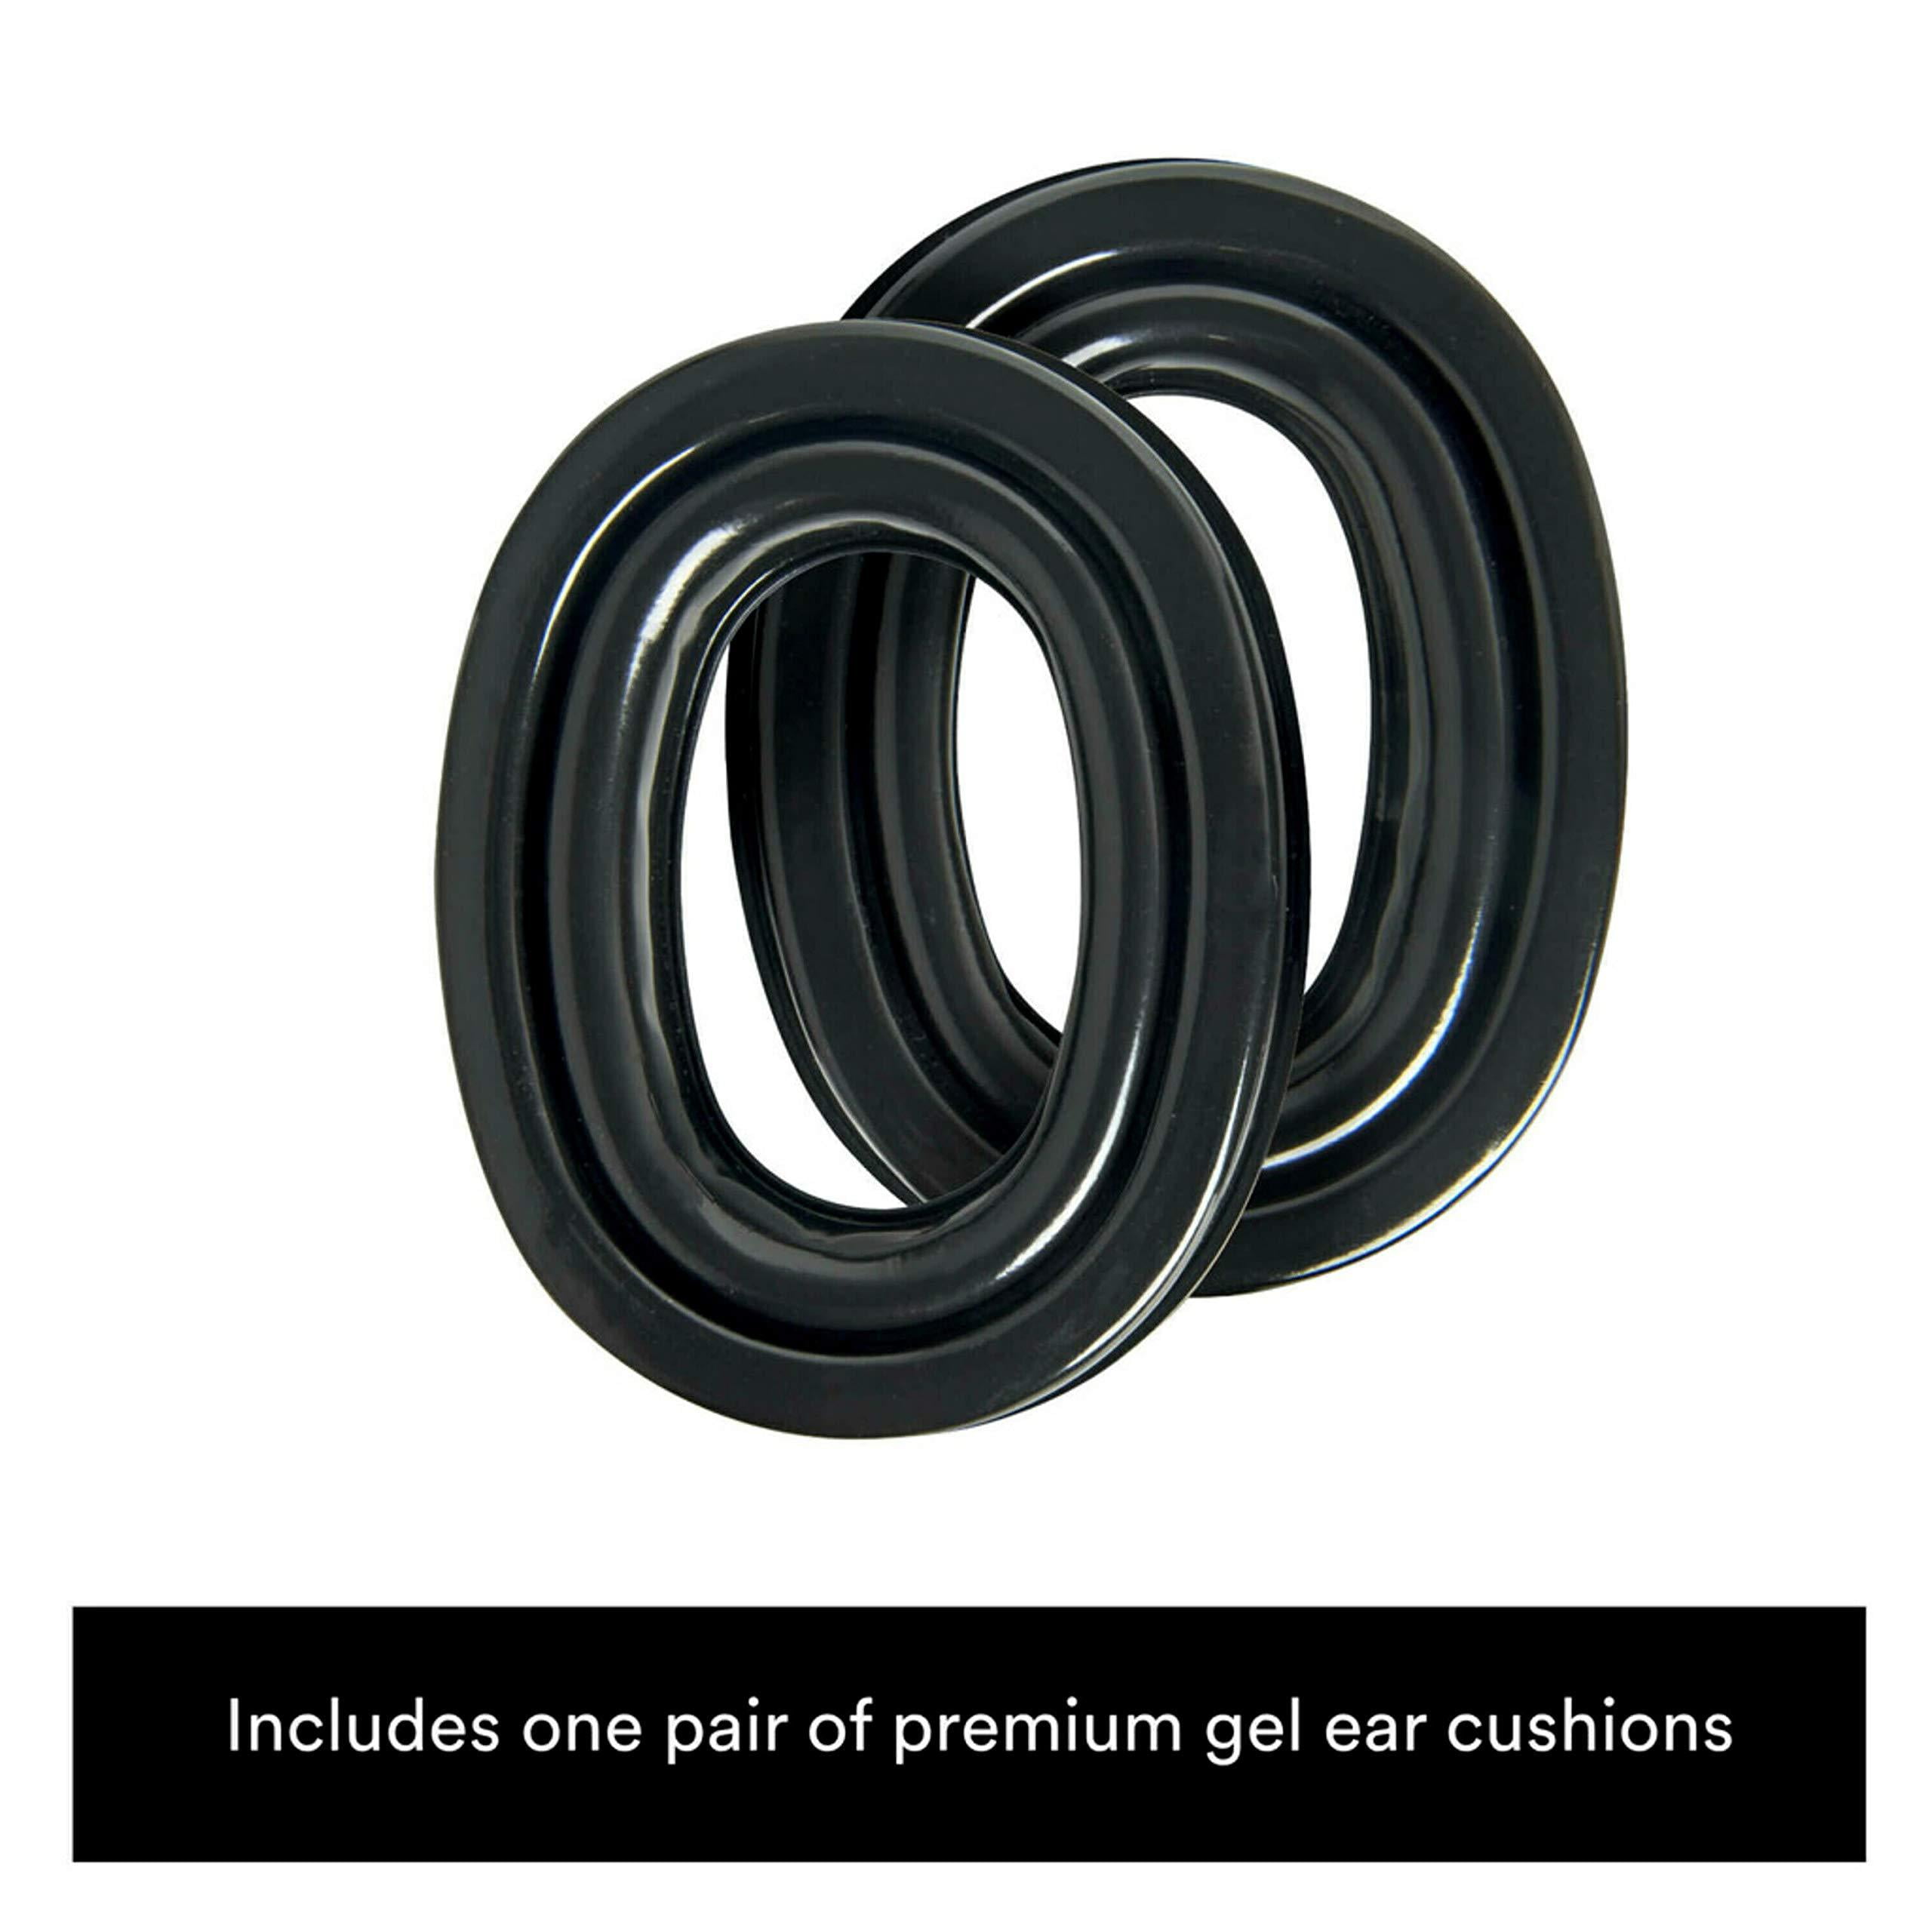 3M Peltor Black ABS Earmuffs Replacement Hygiene Kit for H7 Series Includes One Pair of Cushions and One Pair of Dampers